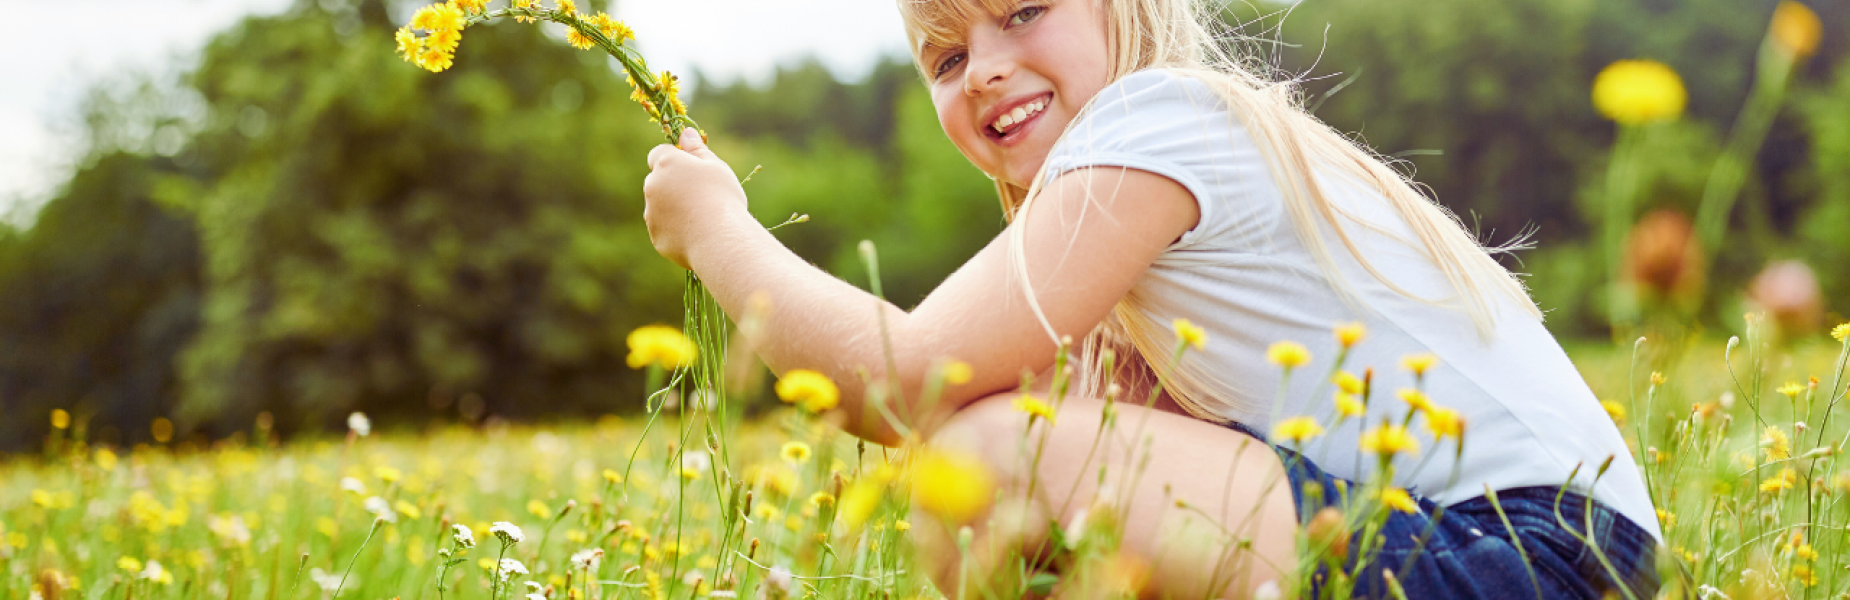 Child with flowers in a meadow